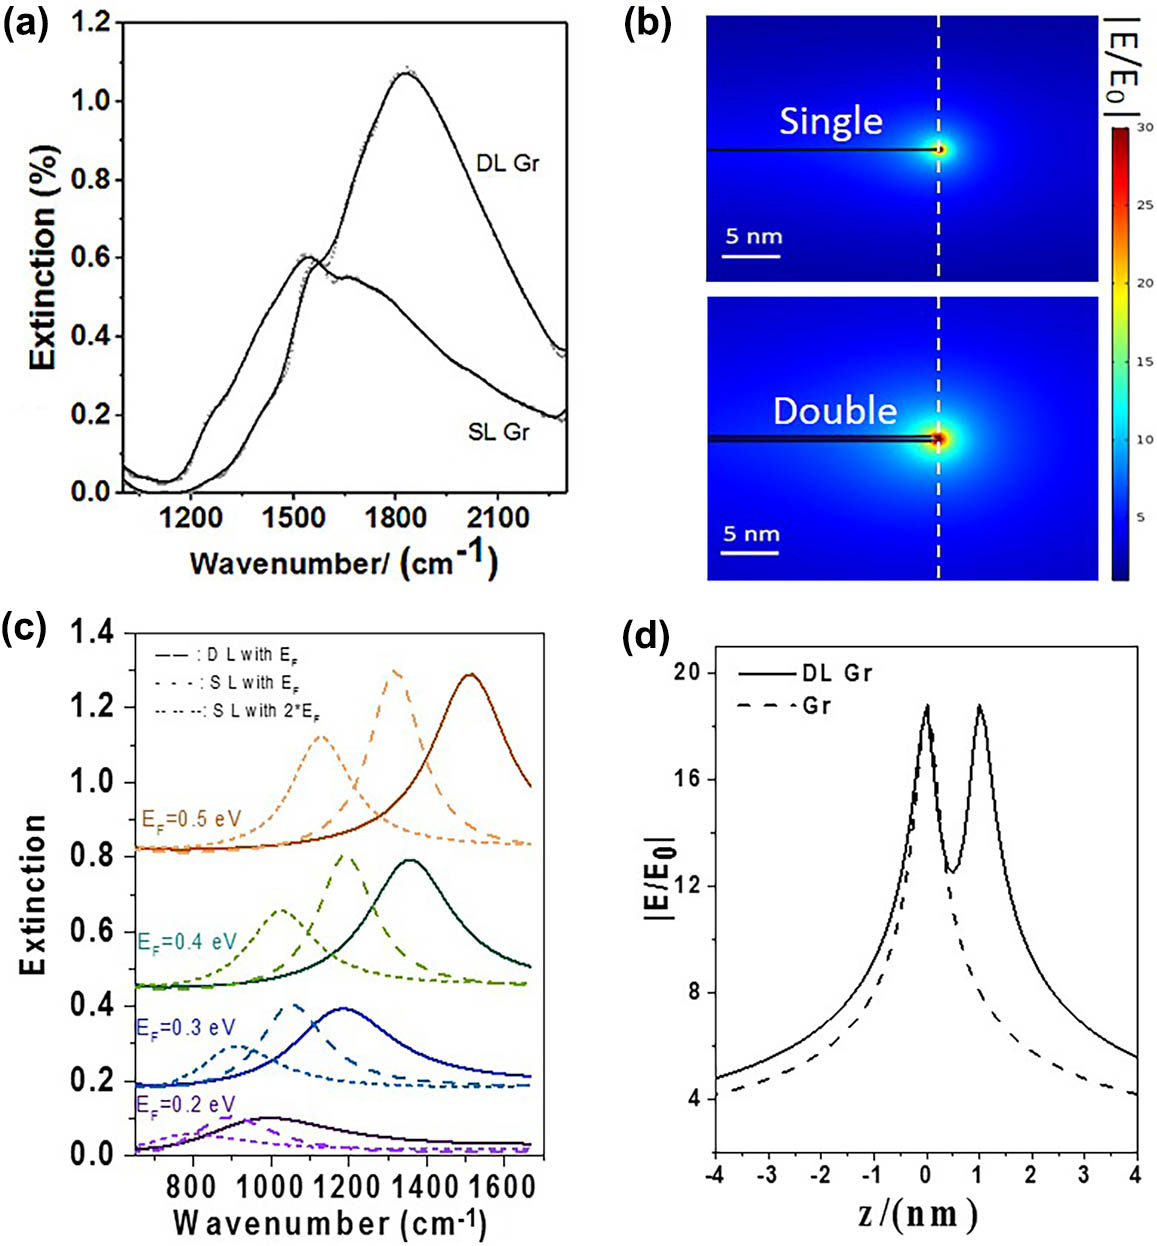 Comparison between double layered graphene plasmon and single layer graphene plasmon. (a) Experimental extinction spectra comparison between single layer graphene and double layered graphene at Vg=−8 V. Ribbon width, 100 nm; period, 140 nm. (b) Simulated near-field enhancement distribution |E/E0| at the edge of single layer graphene (1000 cm−1) and double layered graphene (1350 cm−1) GNRs at their resonant frequencies. (c) Simulated extinction spectra of double layered GNR with EF, single layer graphene with |EF| and 2|EF|. Fermi level EF = 0.2, 0.3, 0.4, 0.5 eV. (d) Near-field enhancement distribution |E/E0| along the white dashed line in (b), EF = 0.3 eV; mobility is using 600 cm2/(V·s).